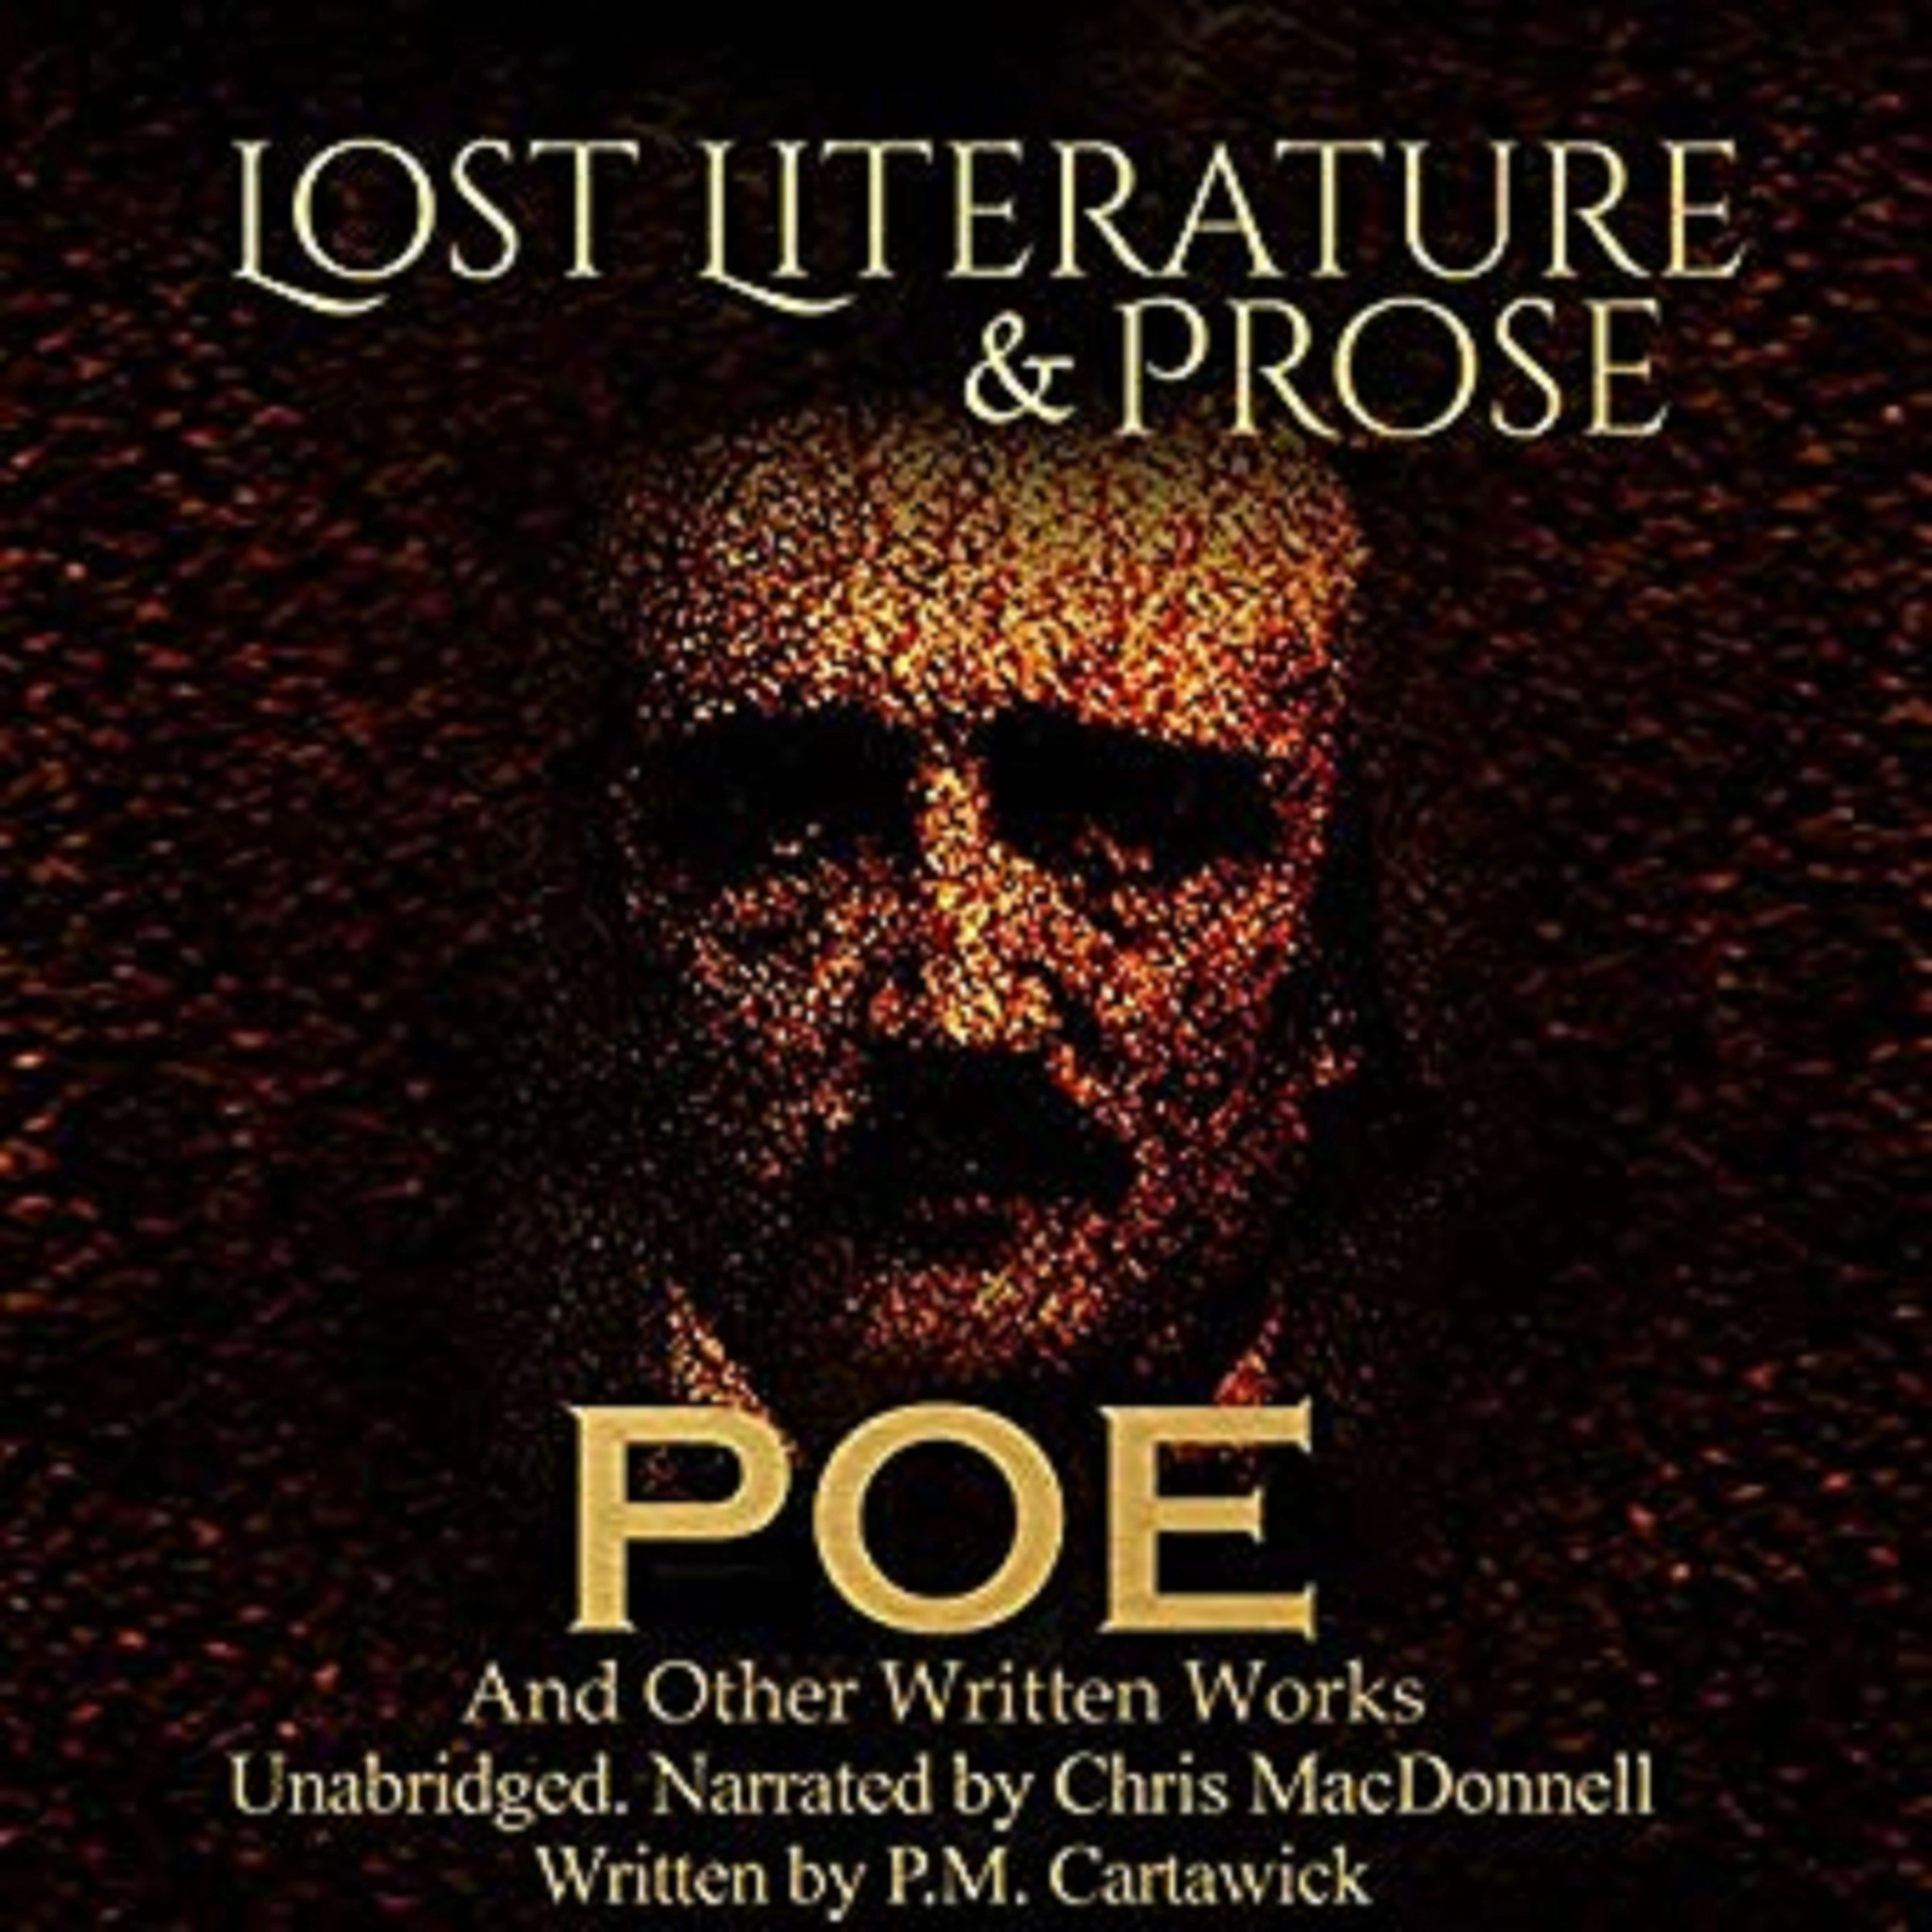 Poe: Lost Literature & Prose Audiobook by P.M. Cartawick